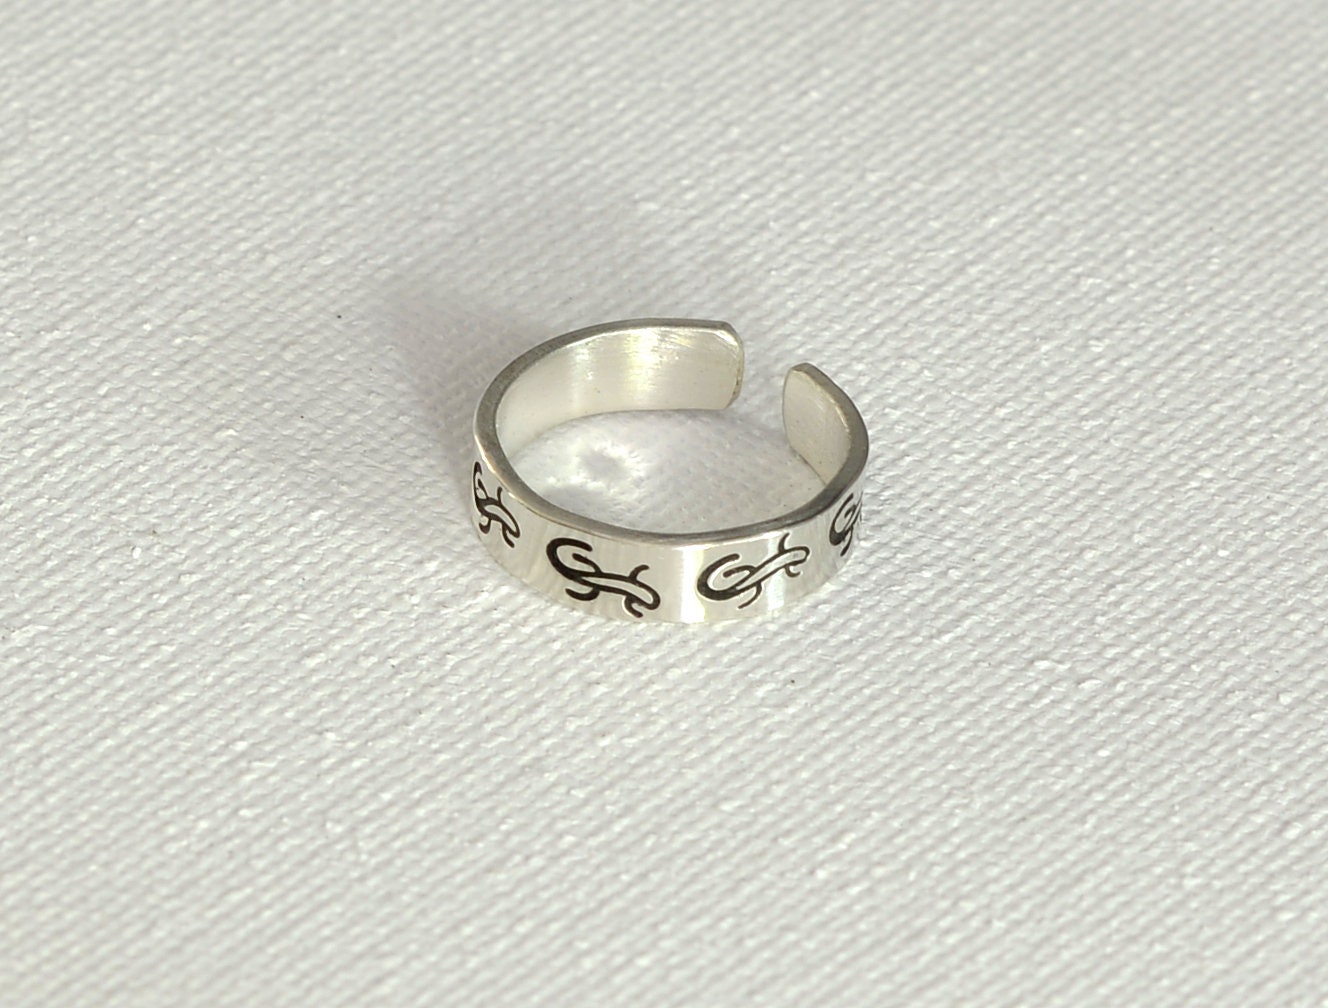 Sterling silver toe ring stamped with dainty lizard theme